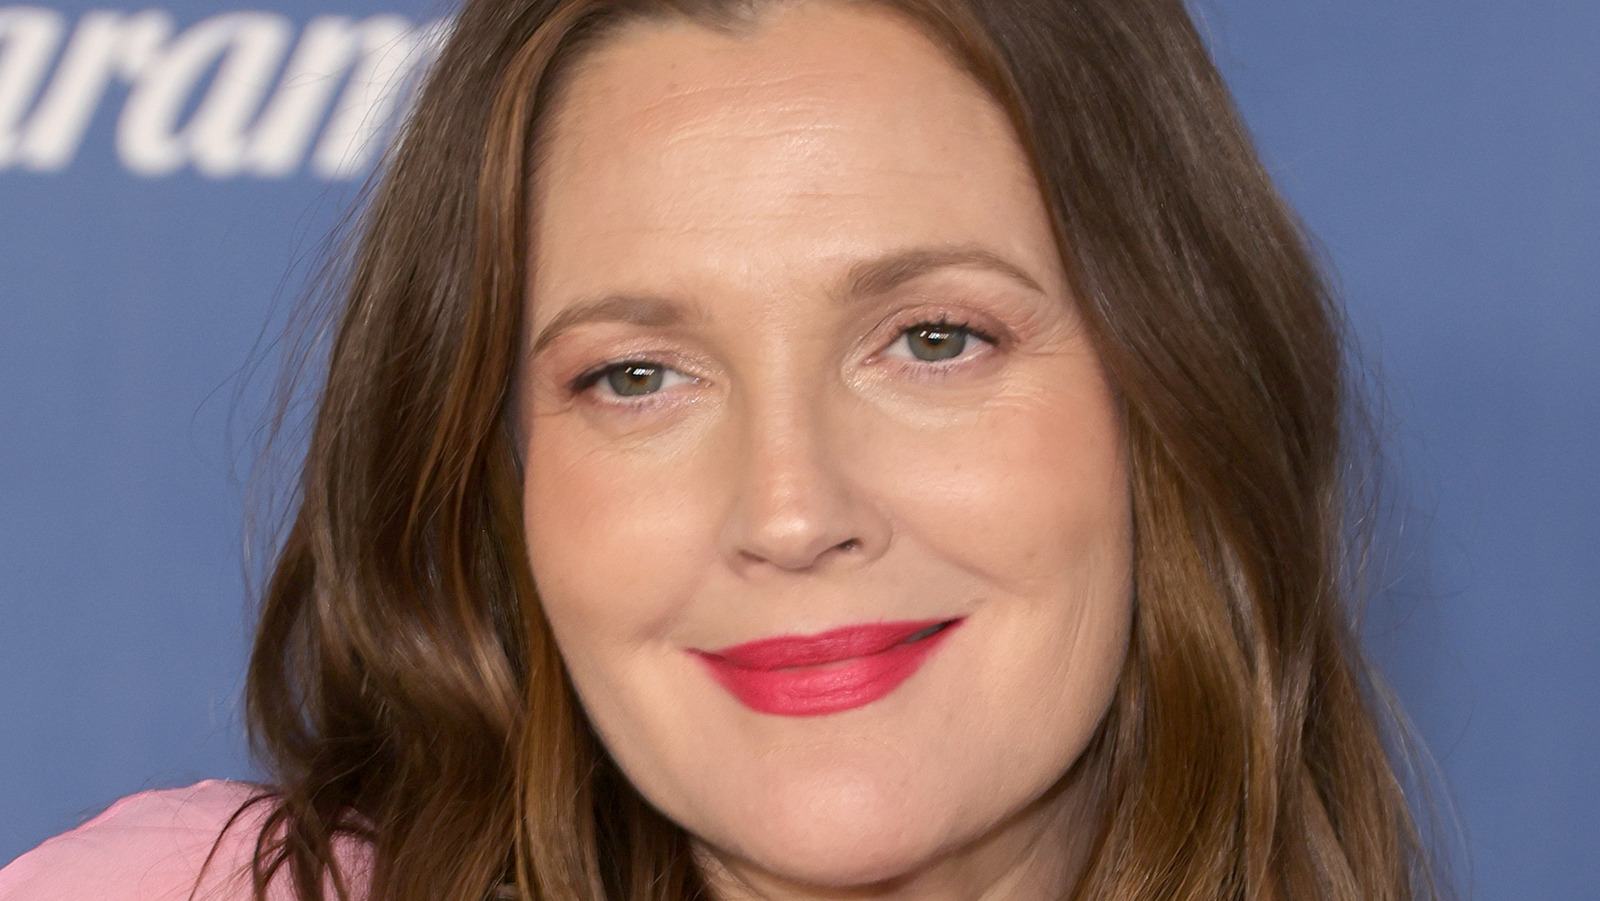 Here’s What Drew Barrymore Looks Like Going Makeup-Free